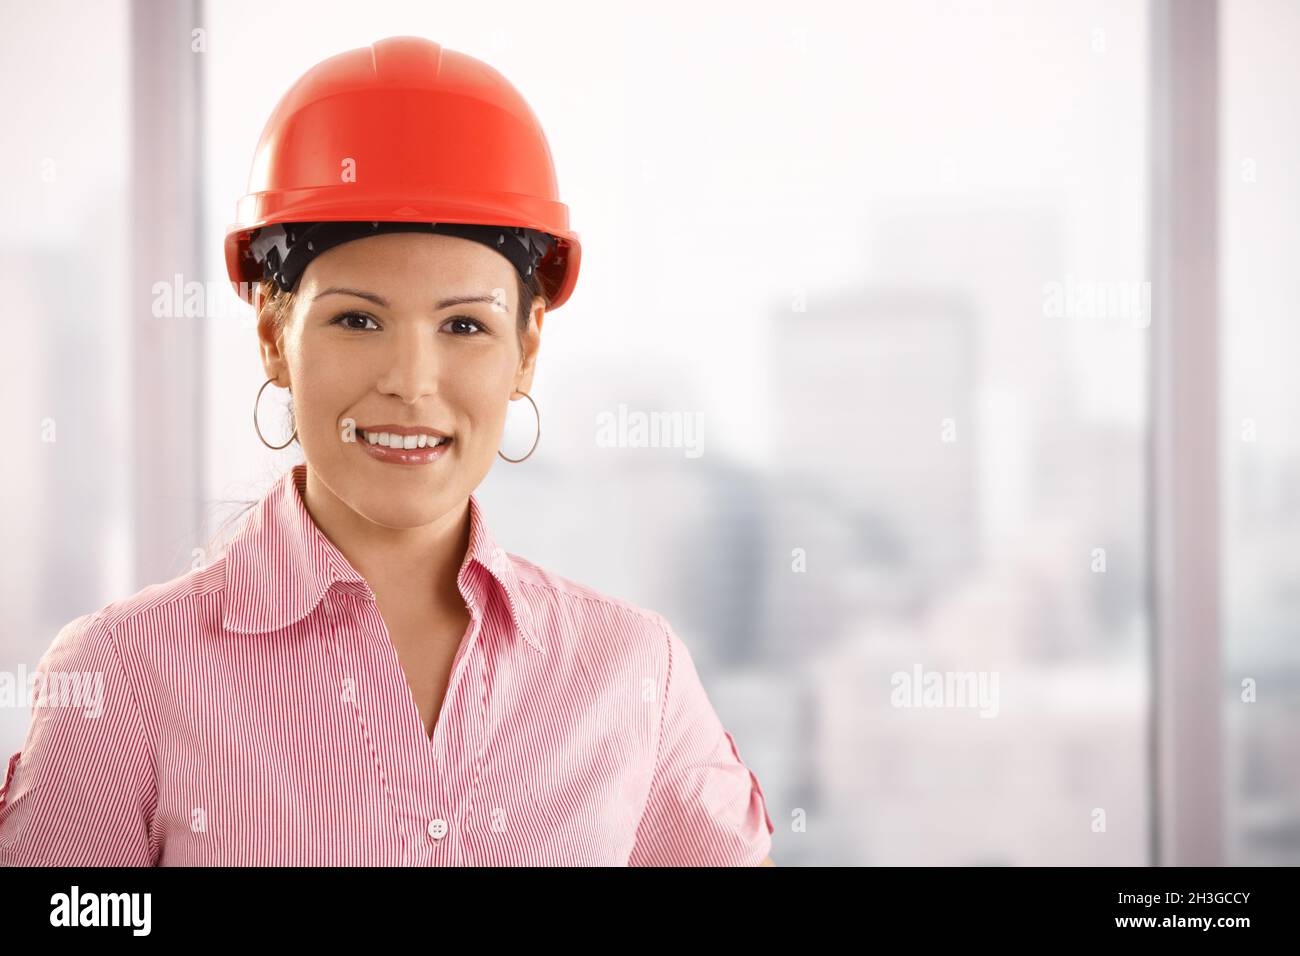 Portrait of young architect Stock Photo